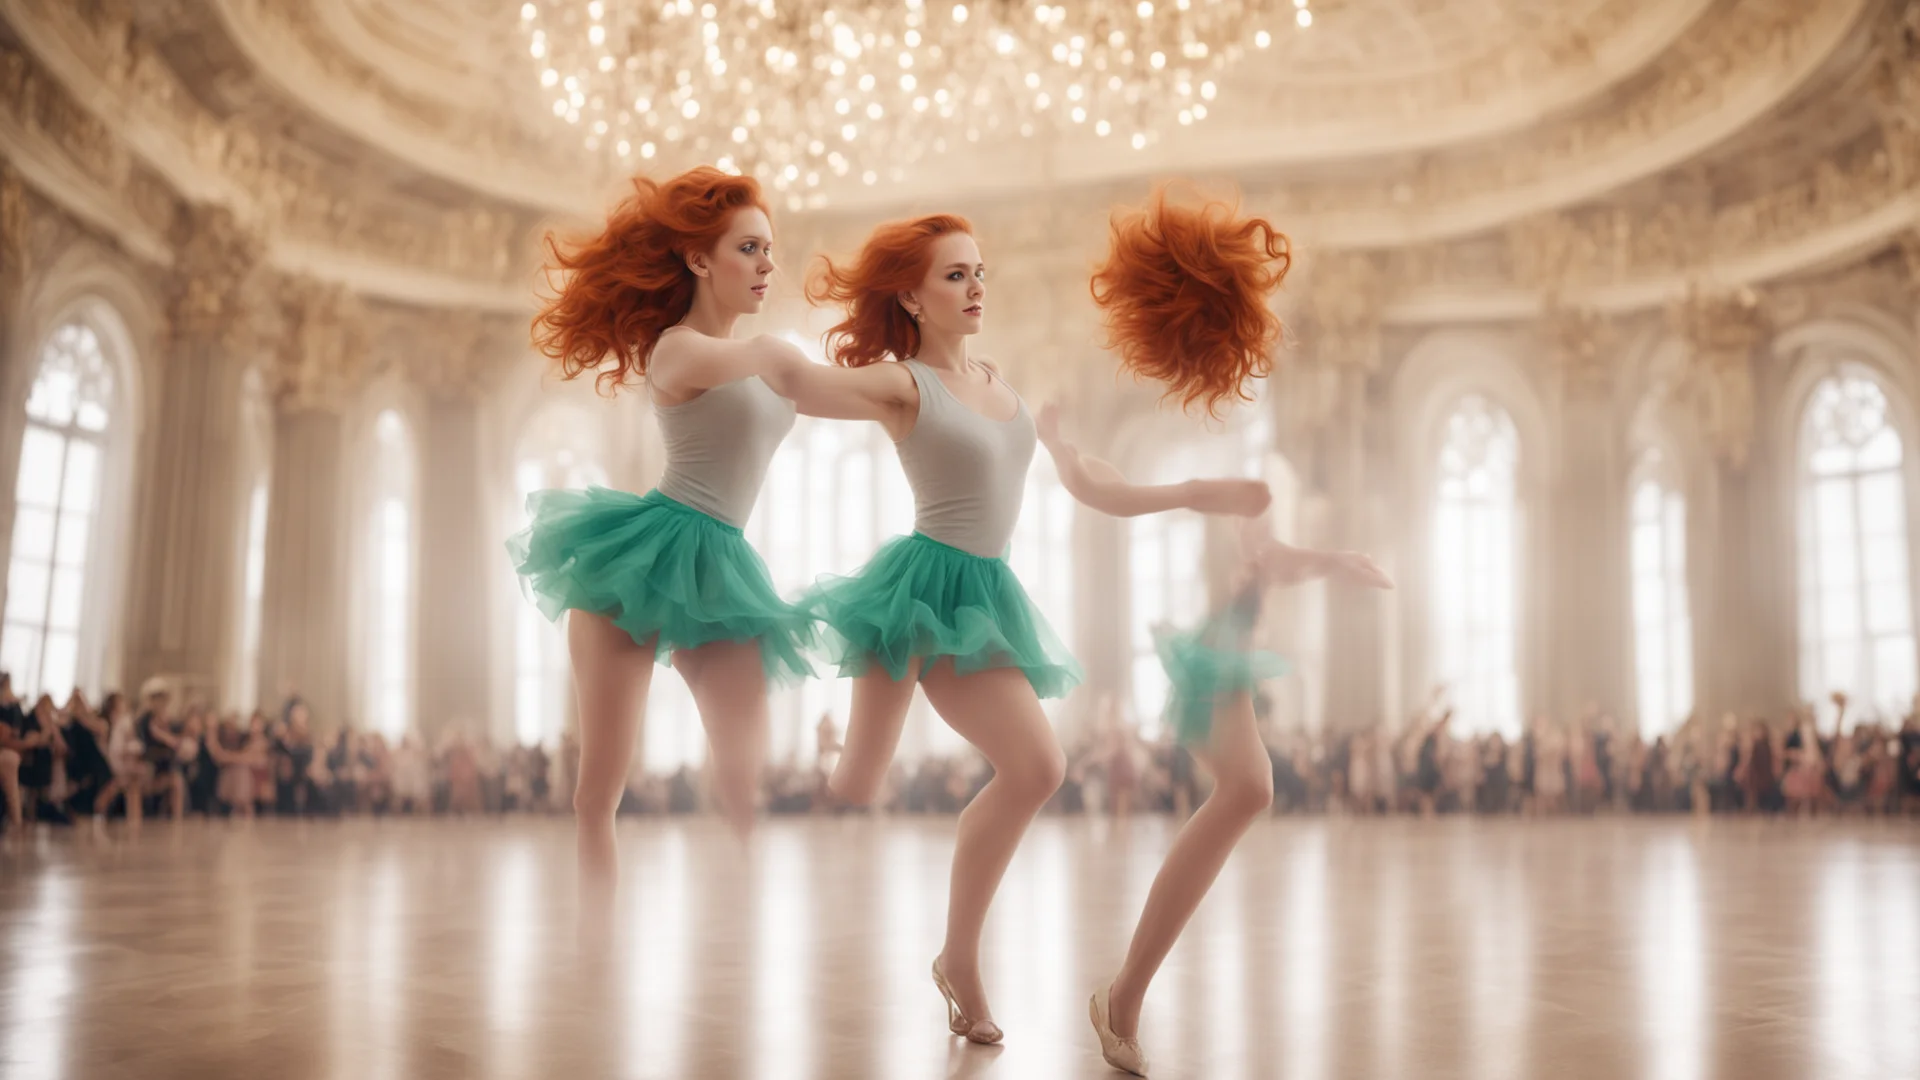 a ginger haired girl with short skirt dancing in a gigantic ballroom amazing awesome portrait 2 wide